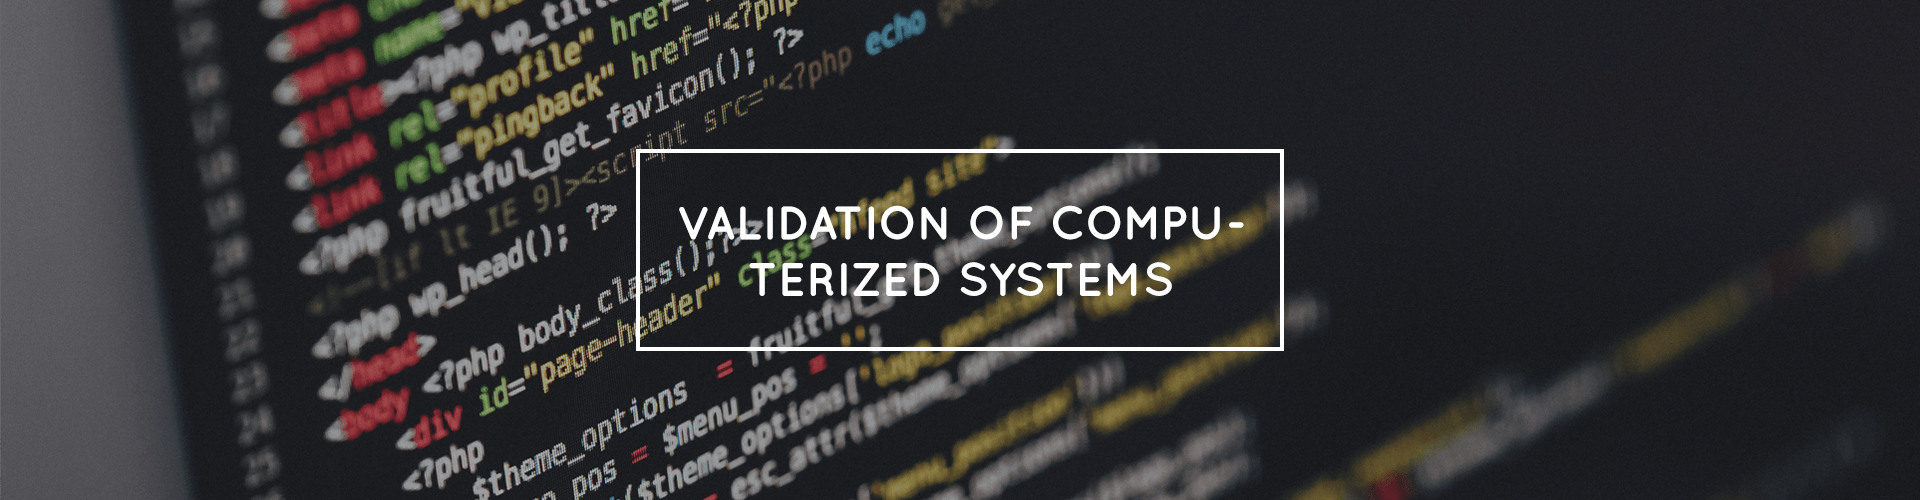 validation of computerized system medical